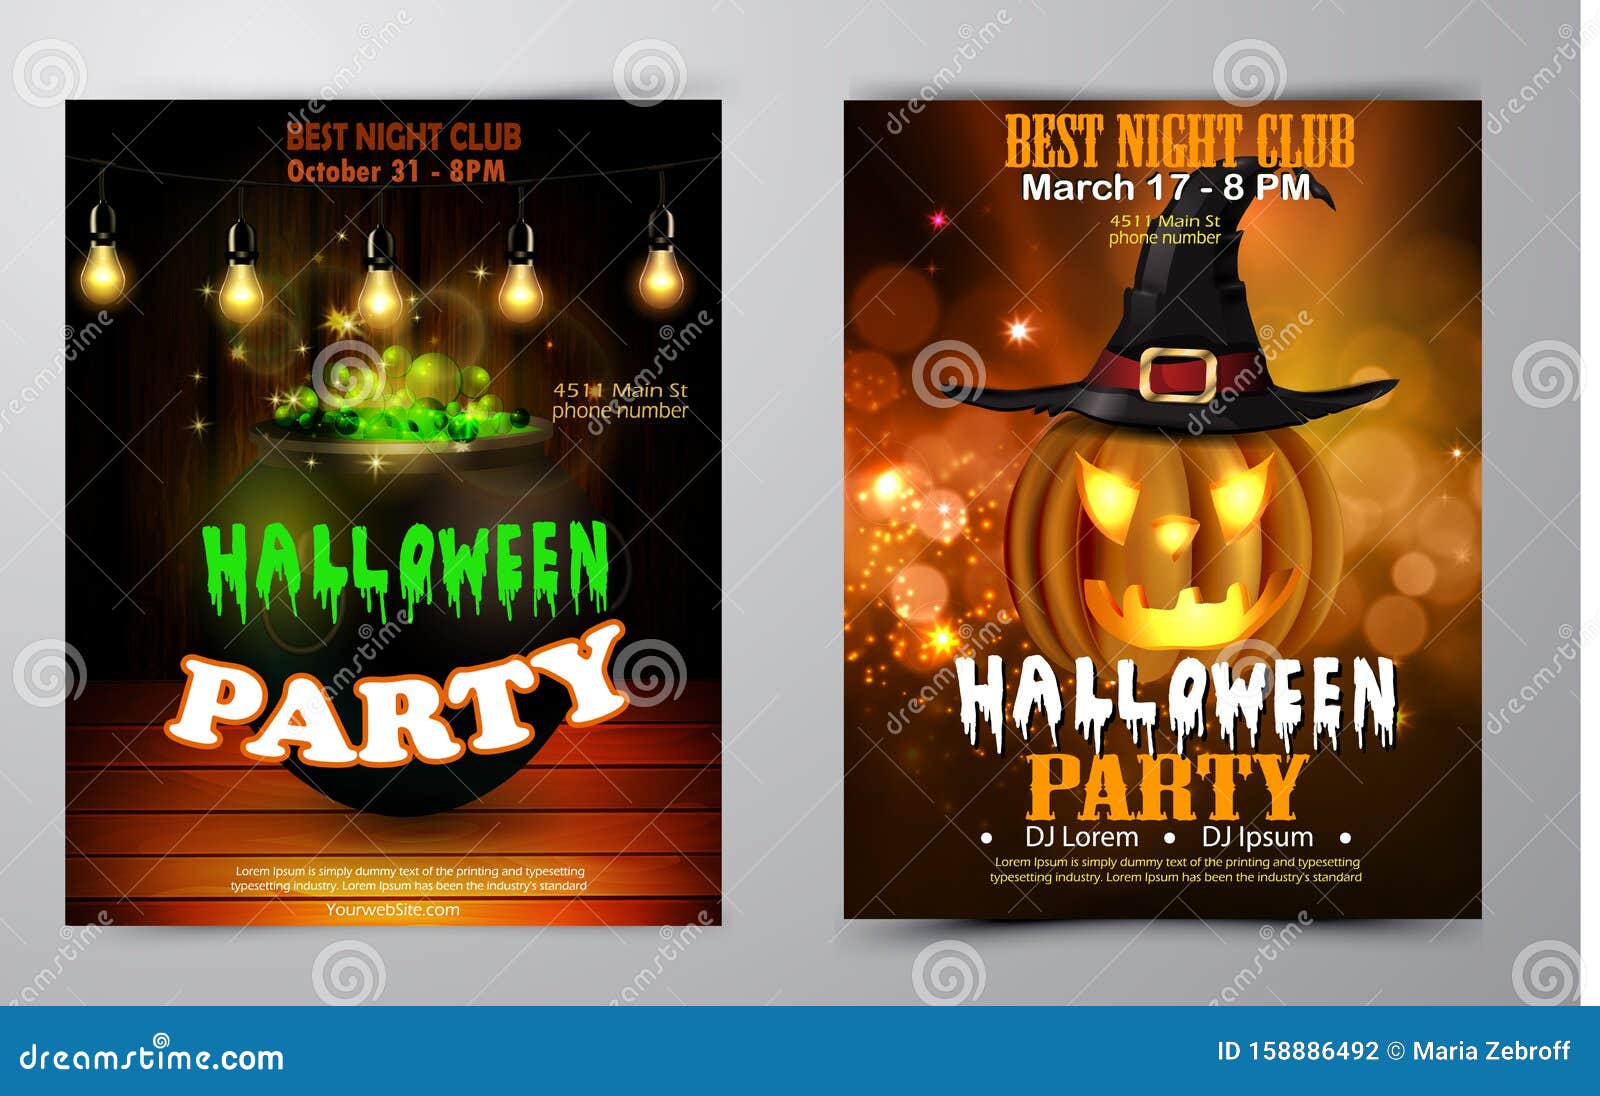 Halloween Party Invitation on Wooden Wall Background Stock Vector ...